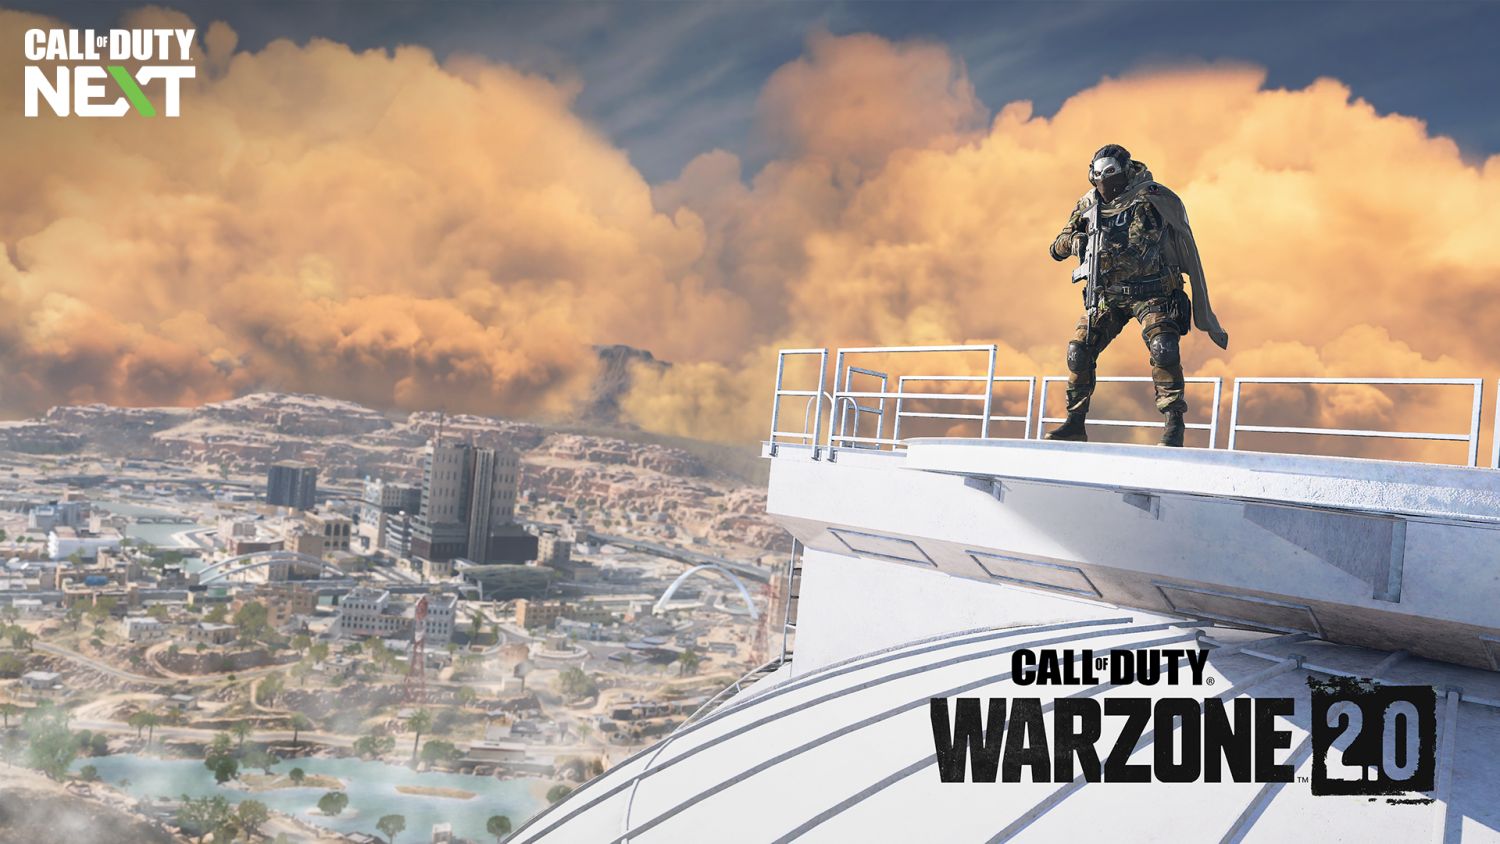 Call Of Duty Next Warzone 2.0